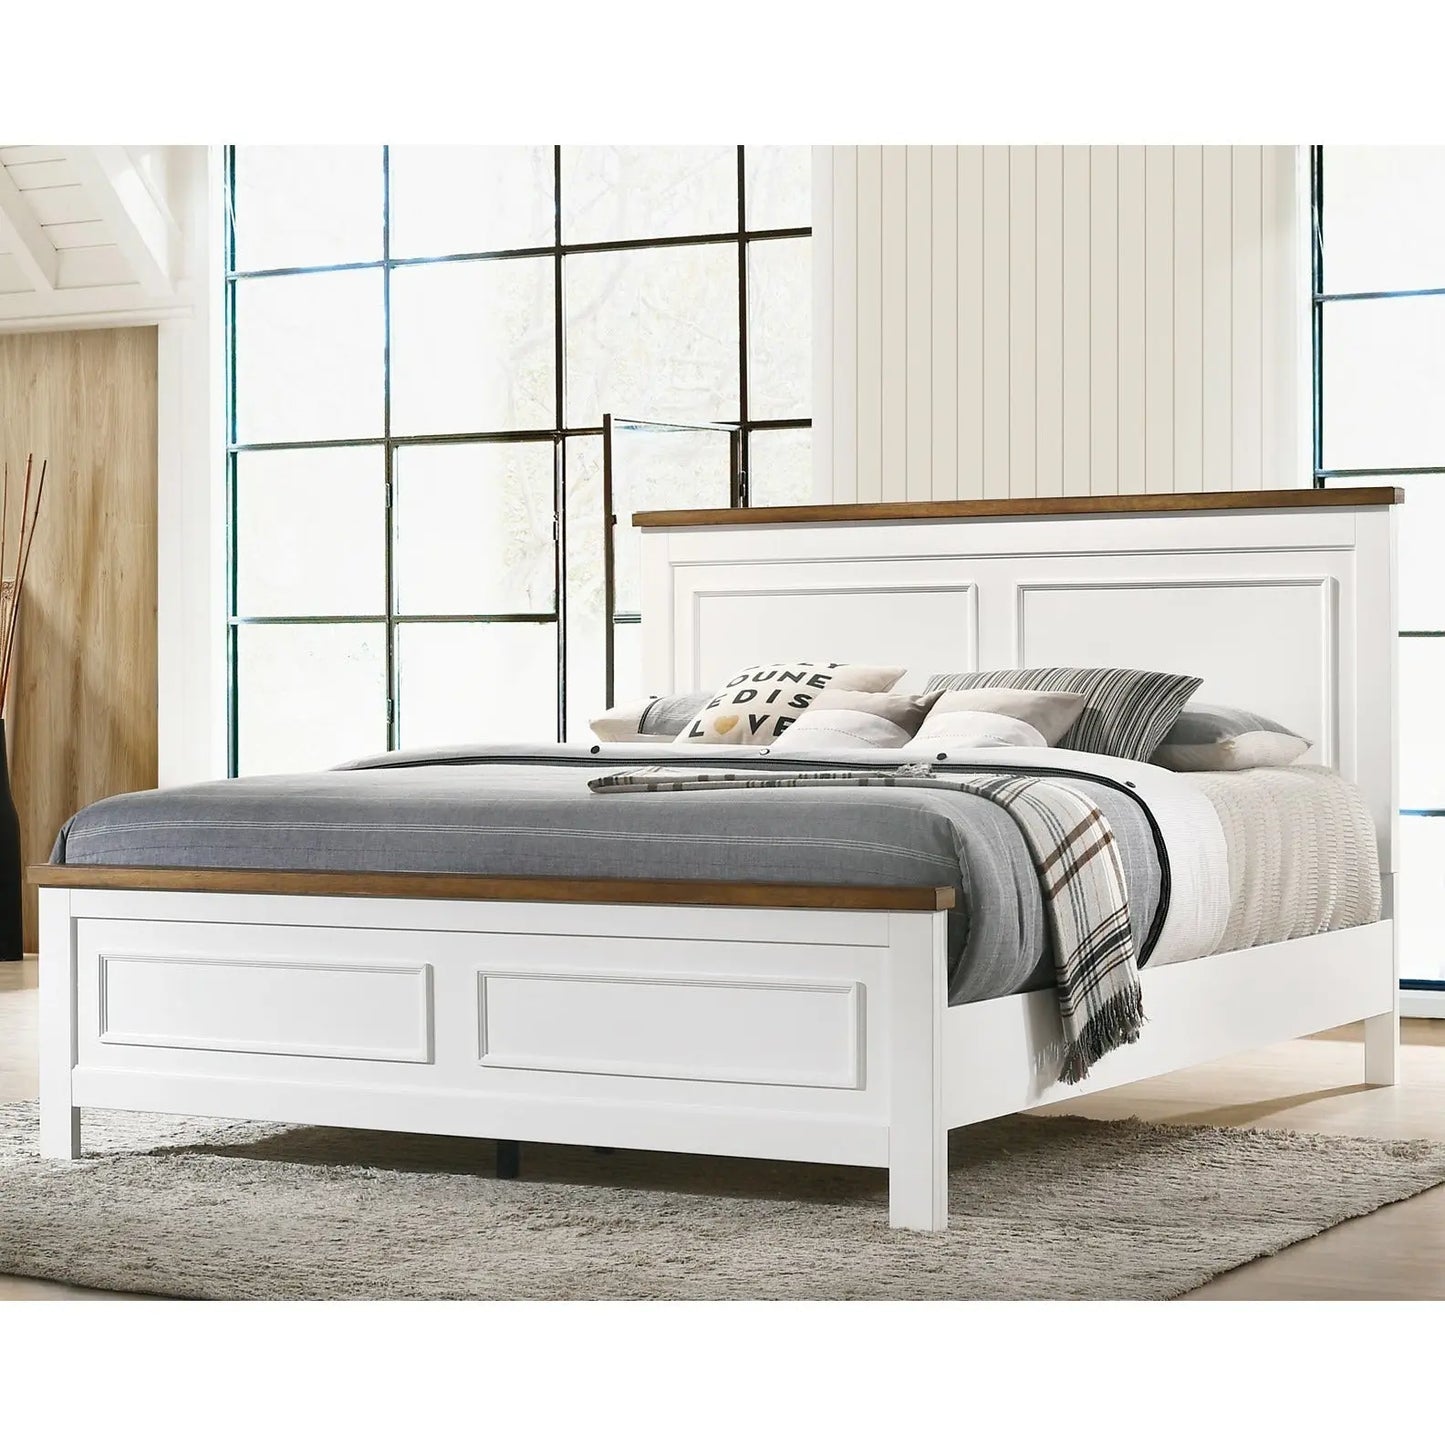 Westconi Package - King Bed BED